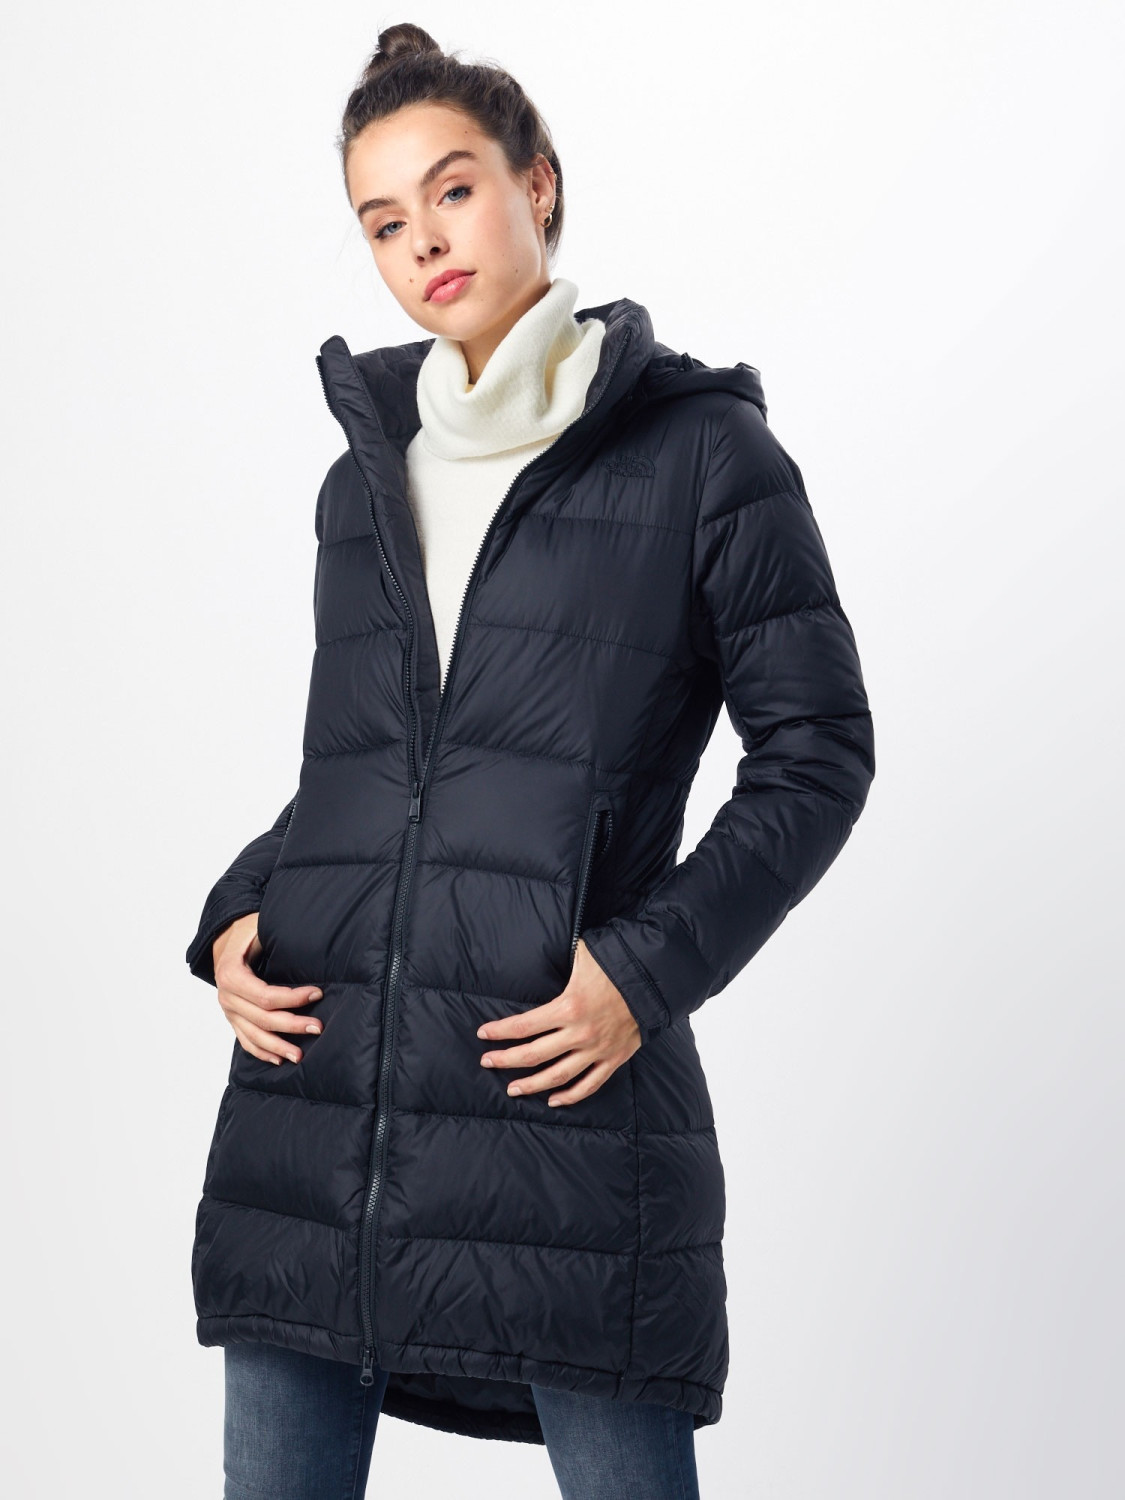 Buy The North Face Women s Metropolis Parka III tnf black from Â£311.69 (Today) â Best Deals on 